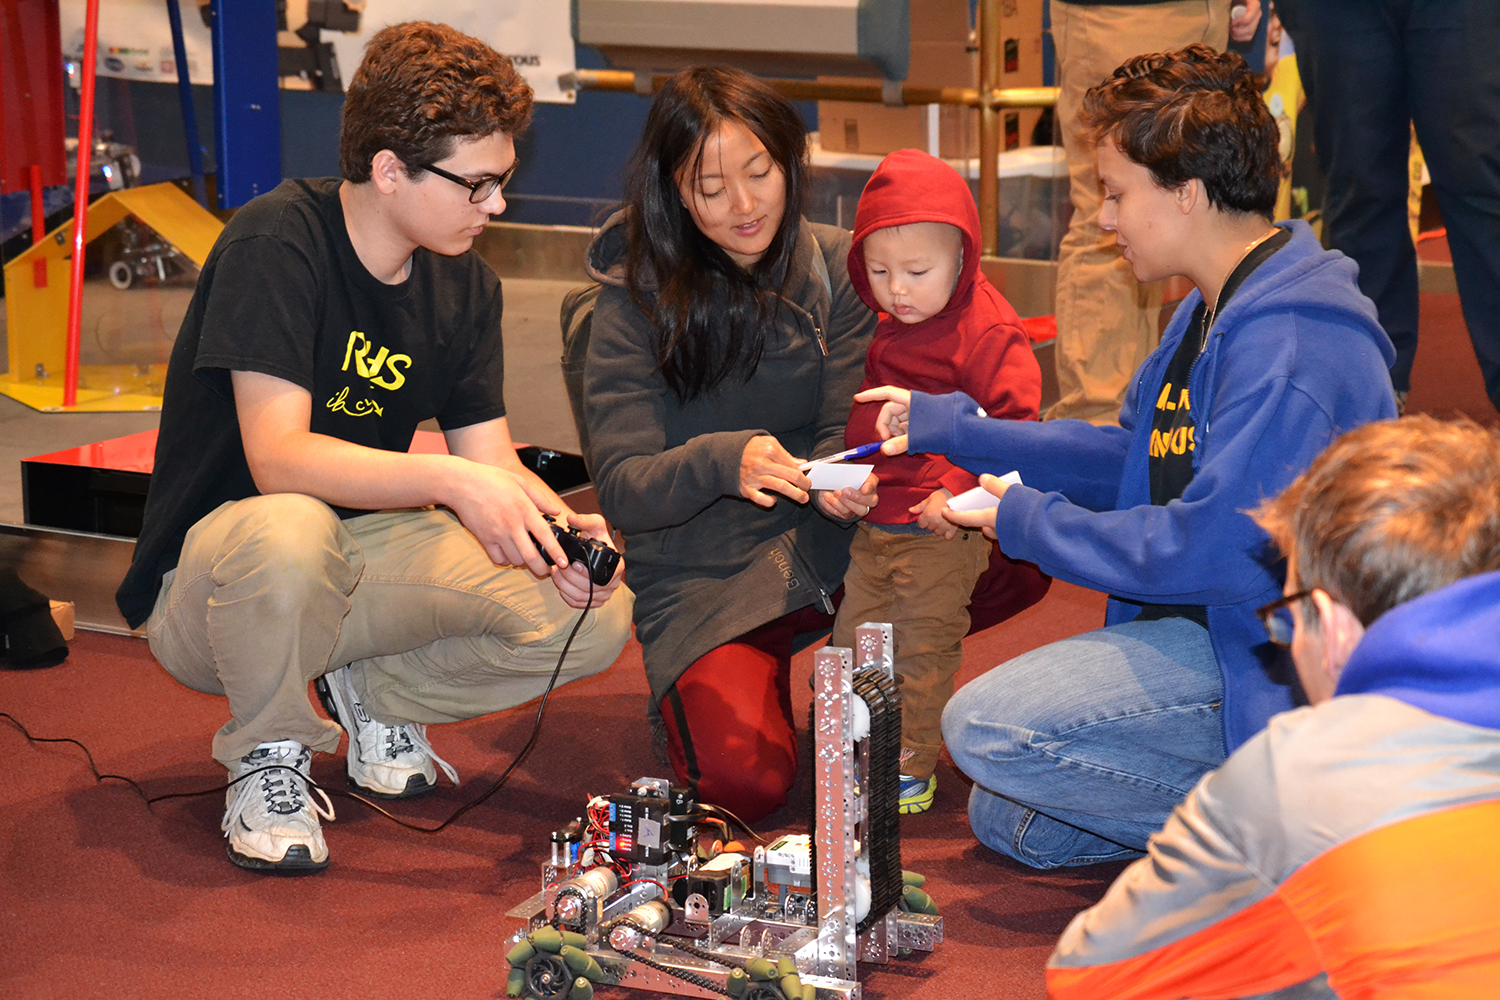 A student demonstrates a FIRST robot to onlookers